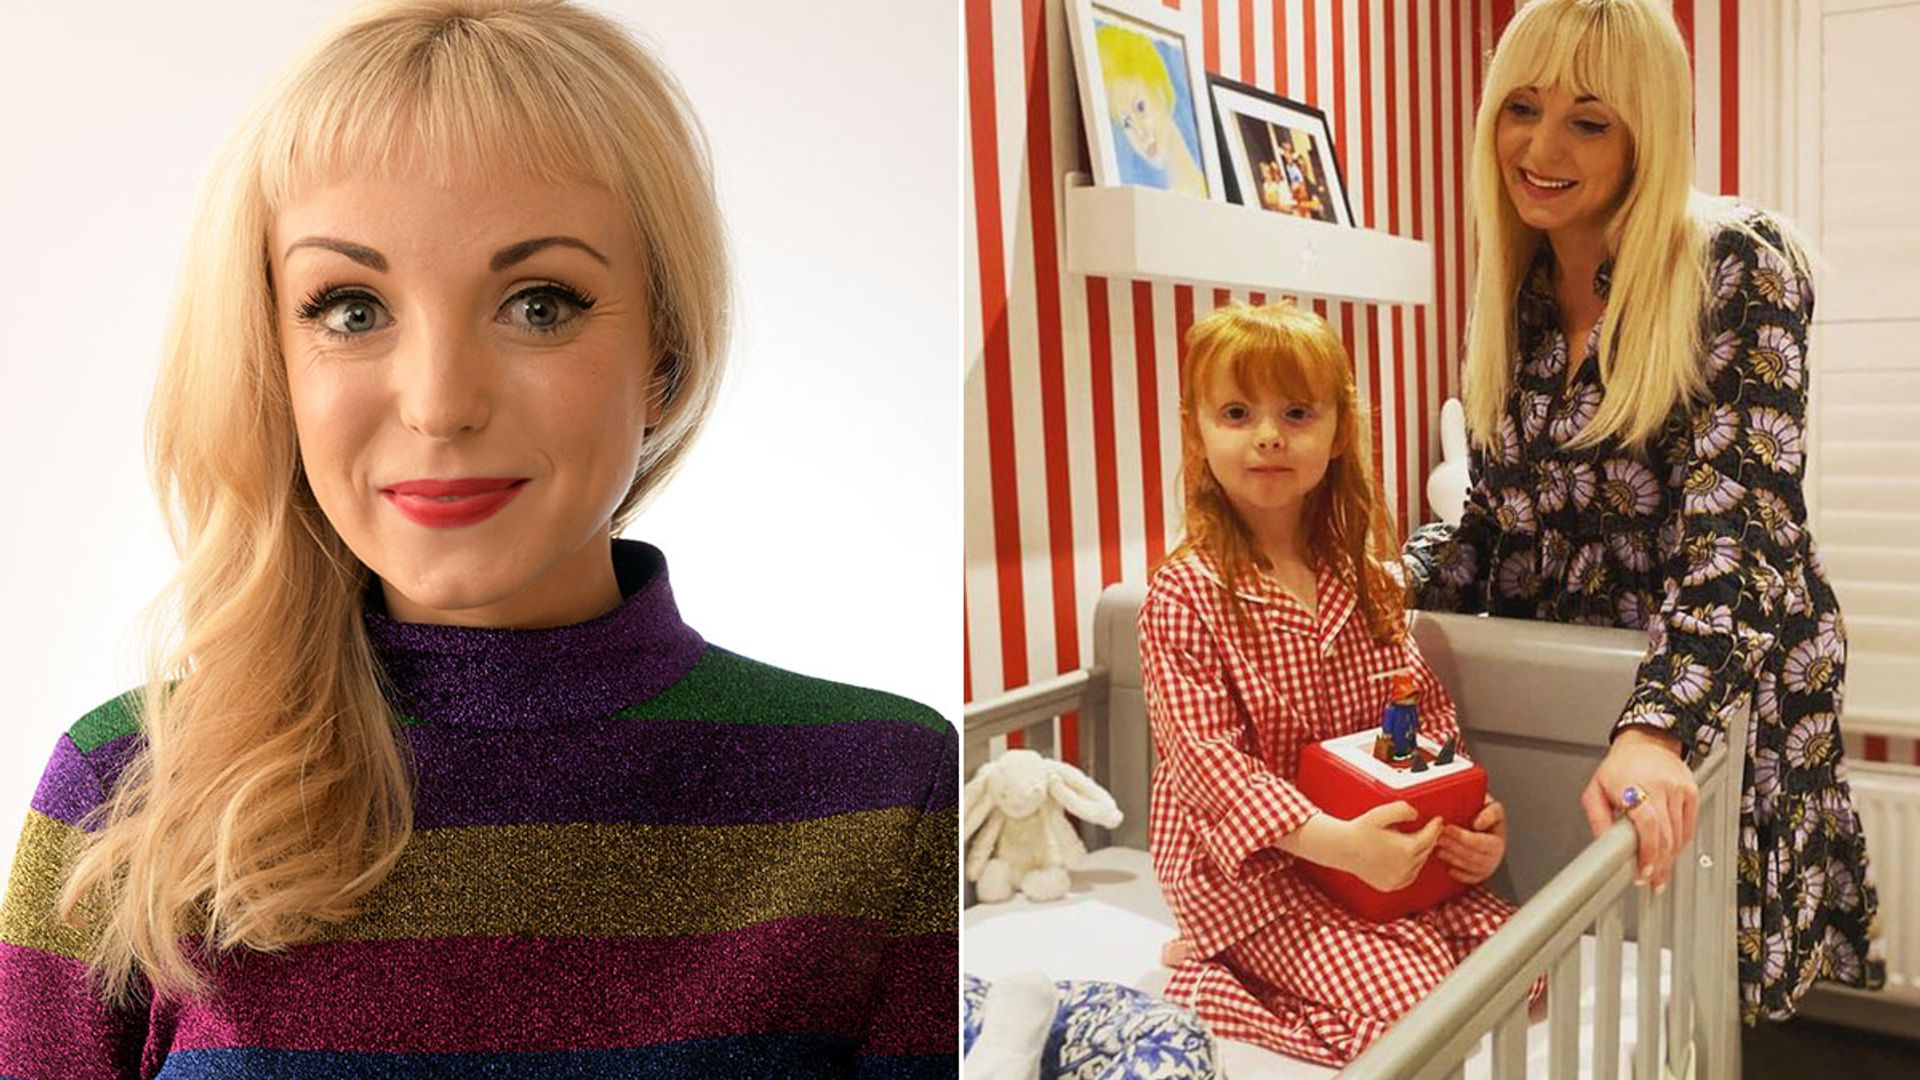 Call The Midwife’s Helen George’s daughter Wren’s cosy bedroom is more colourful than you’d expect